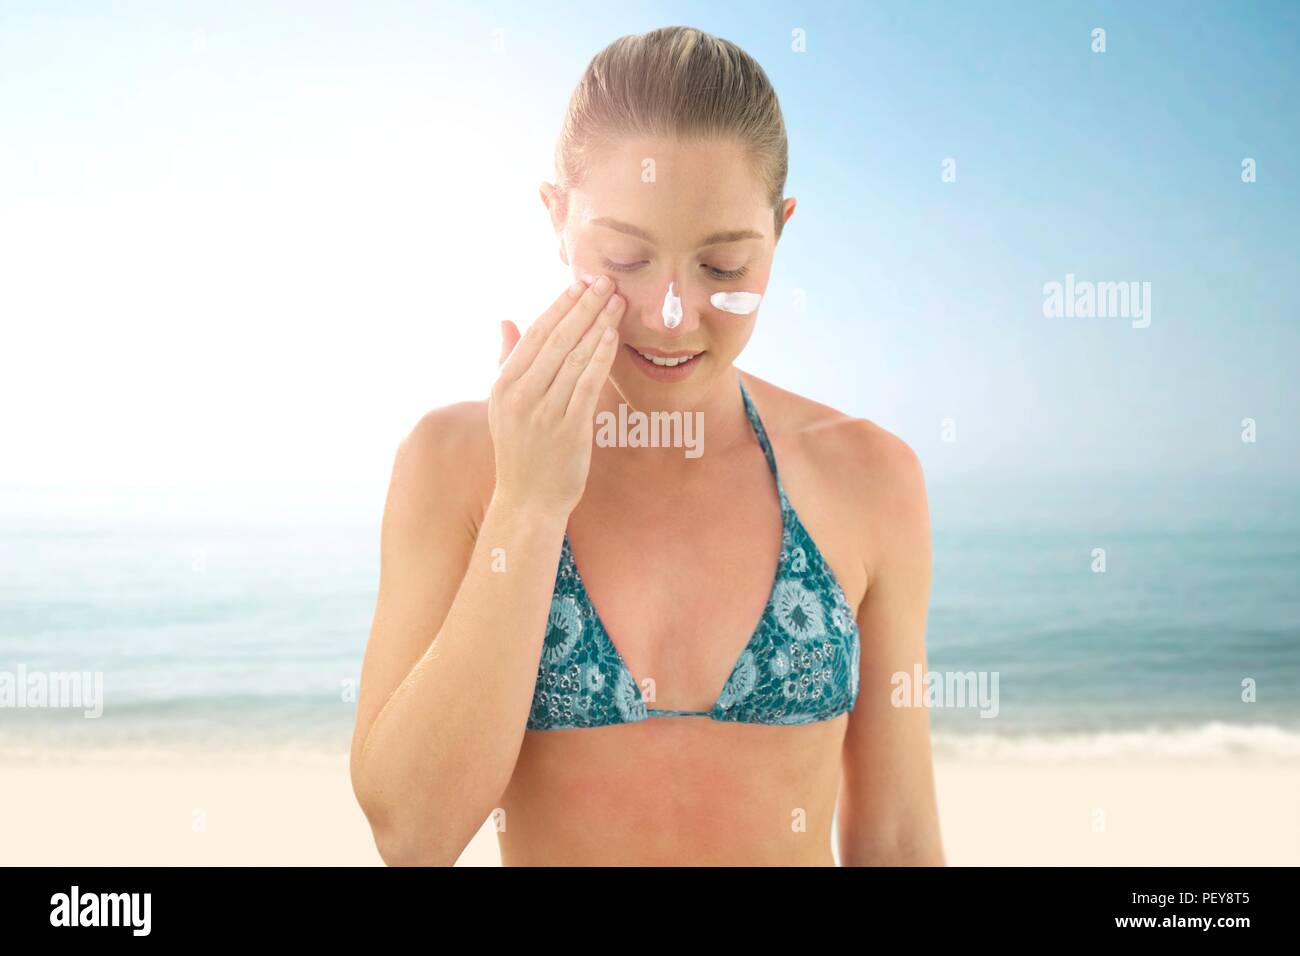 Woman applying sunscreen to her face. Stock Photo